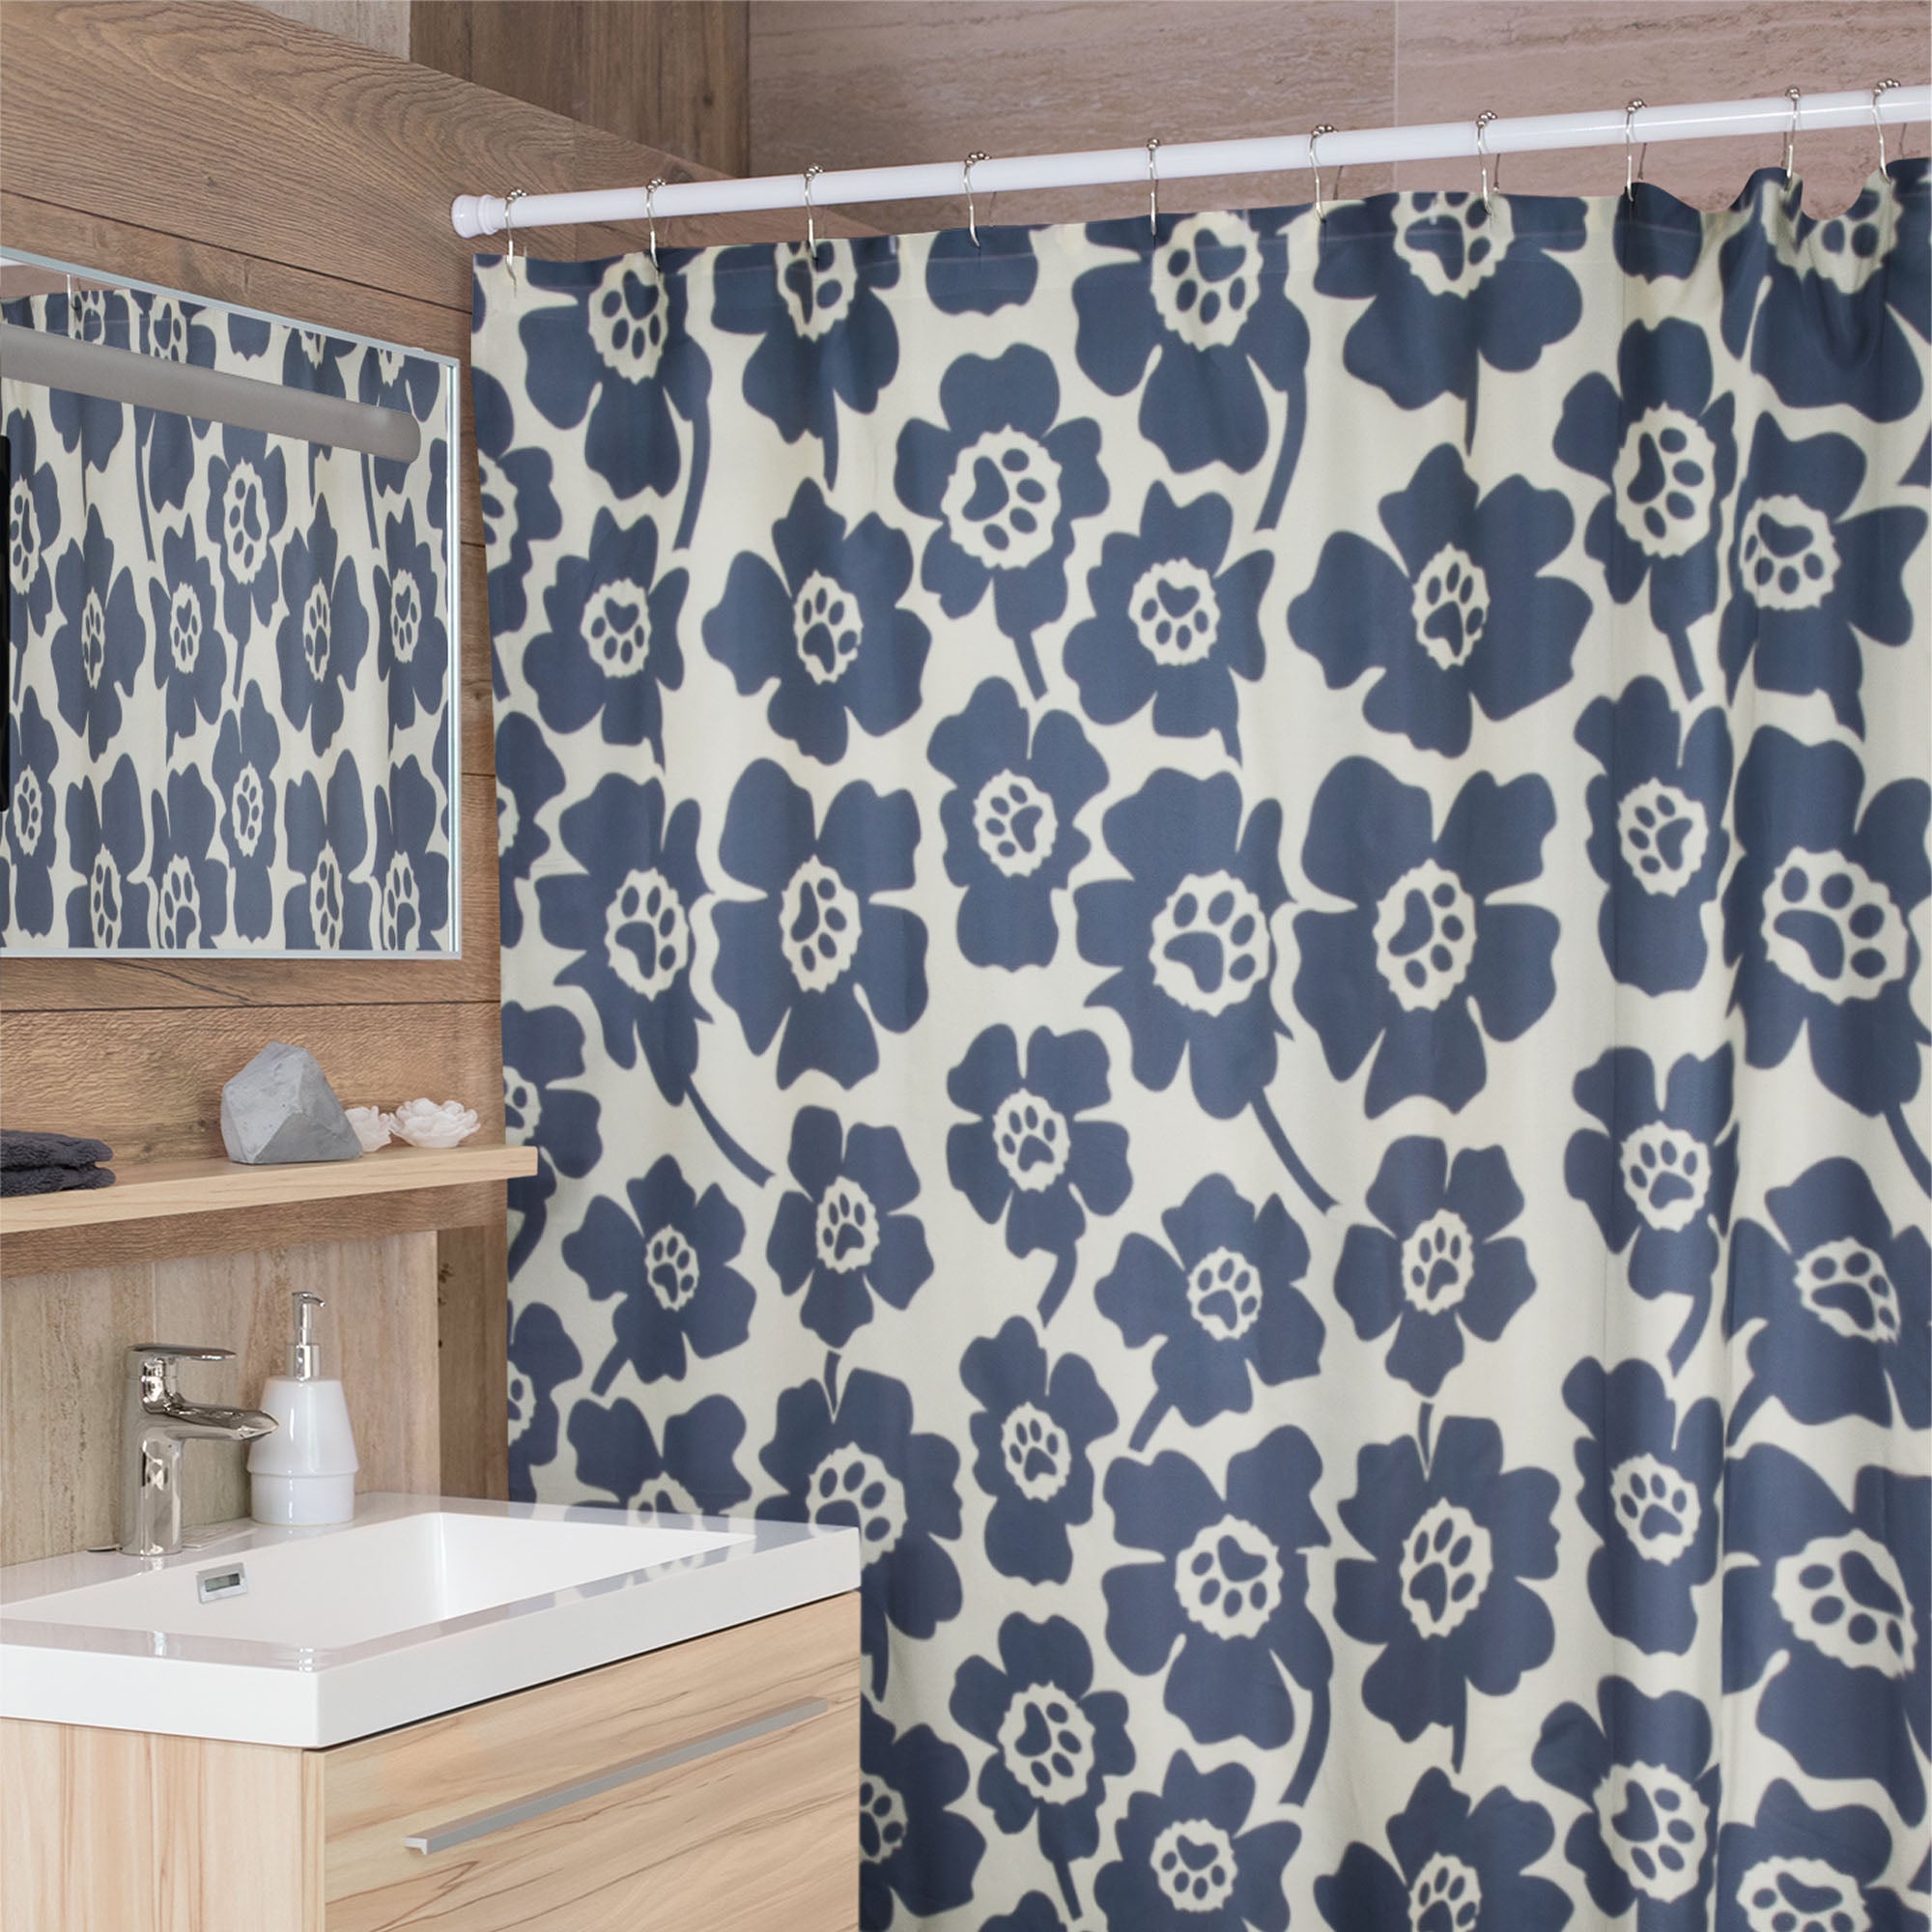 Pawsitively Pretty Shower Curtain - Navy & Cream Paw Print